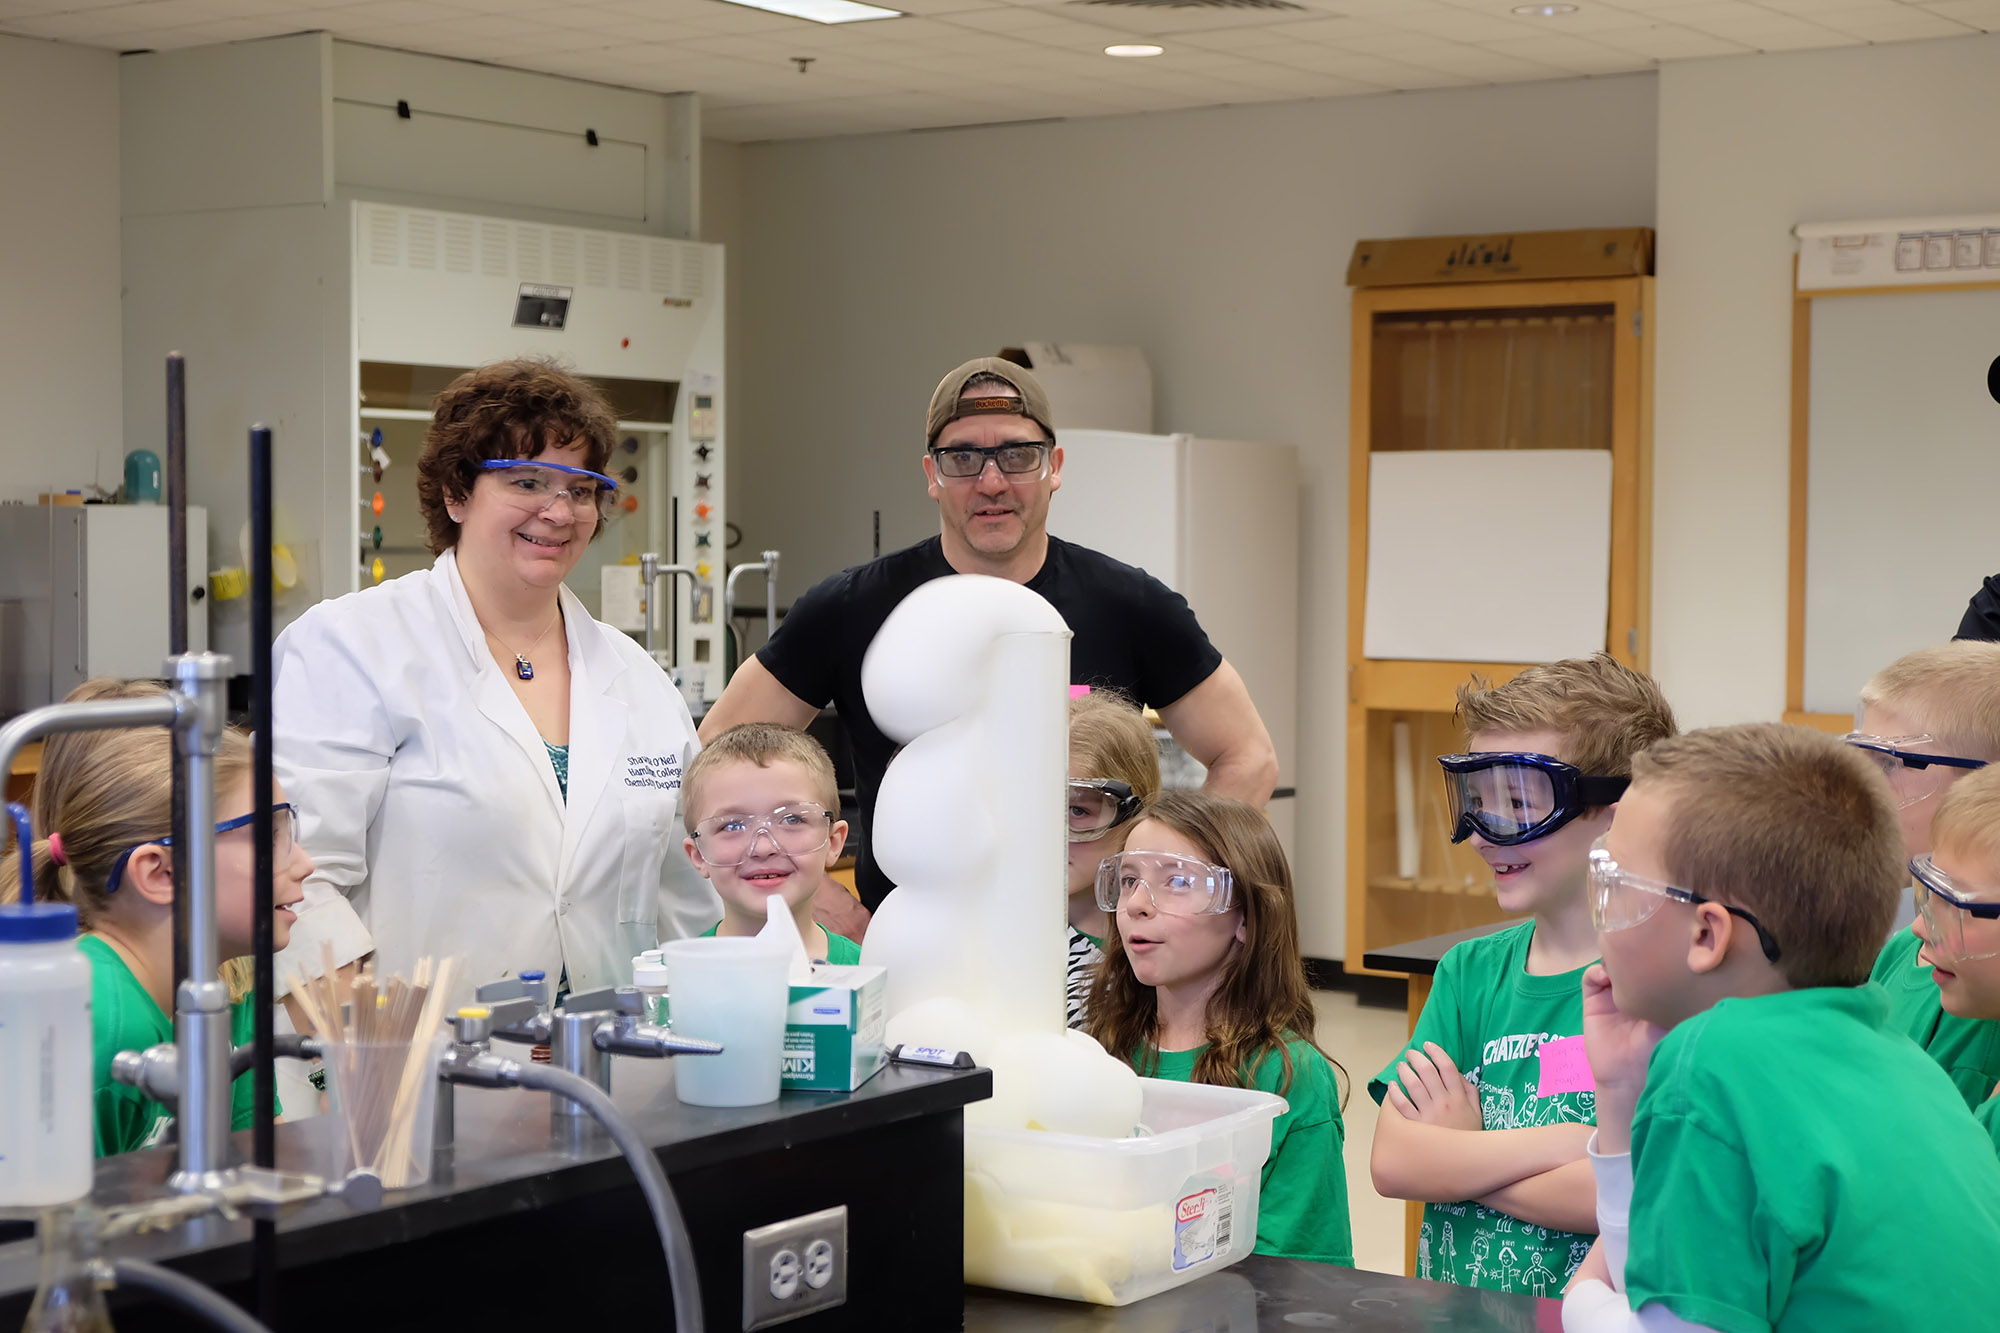 Director of Laboratories Shawna O'Neil prepares elephant's toothpaste in a chemistry lab, with a captive audience.